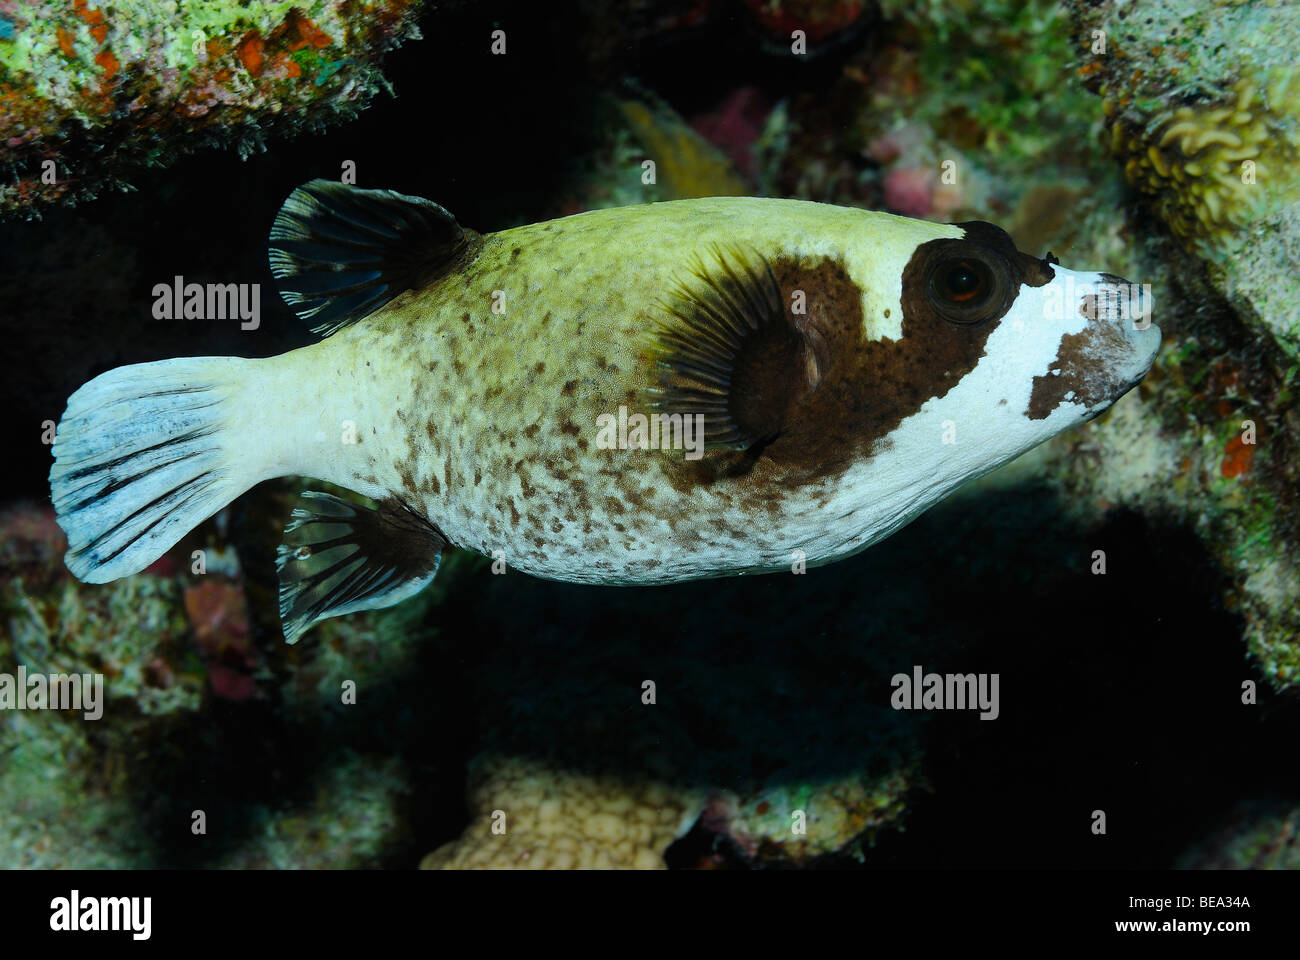 Blackspotted puffer fish, Red Sea Stock Photo